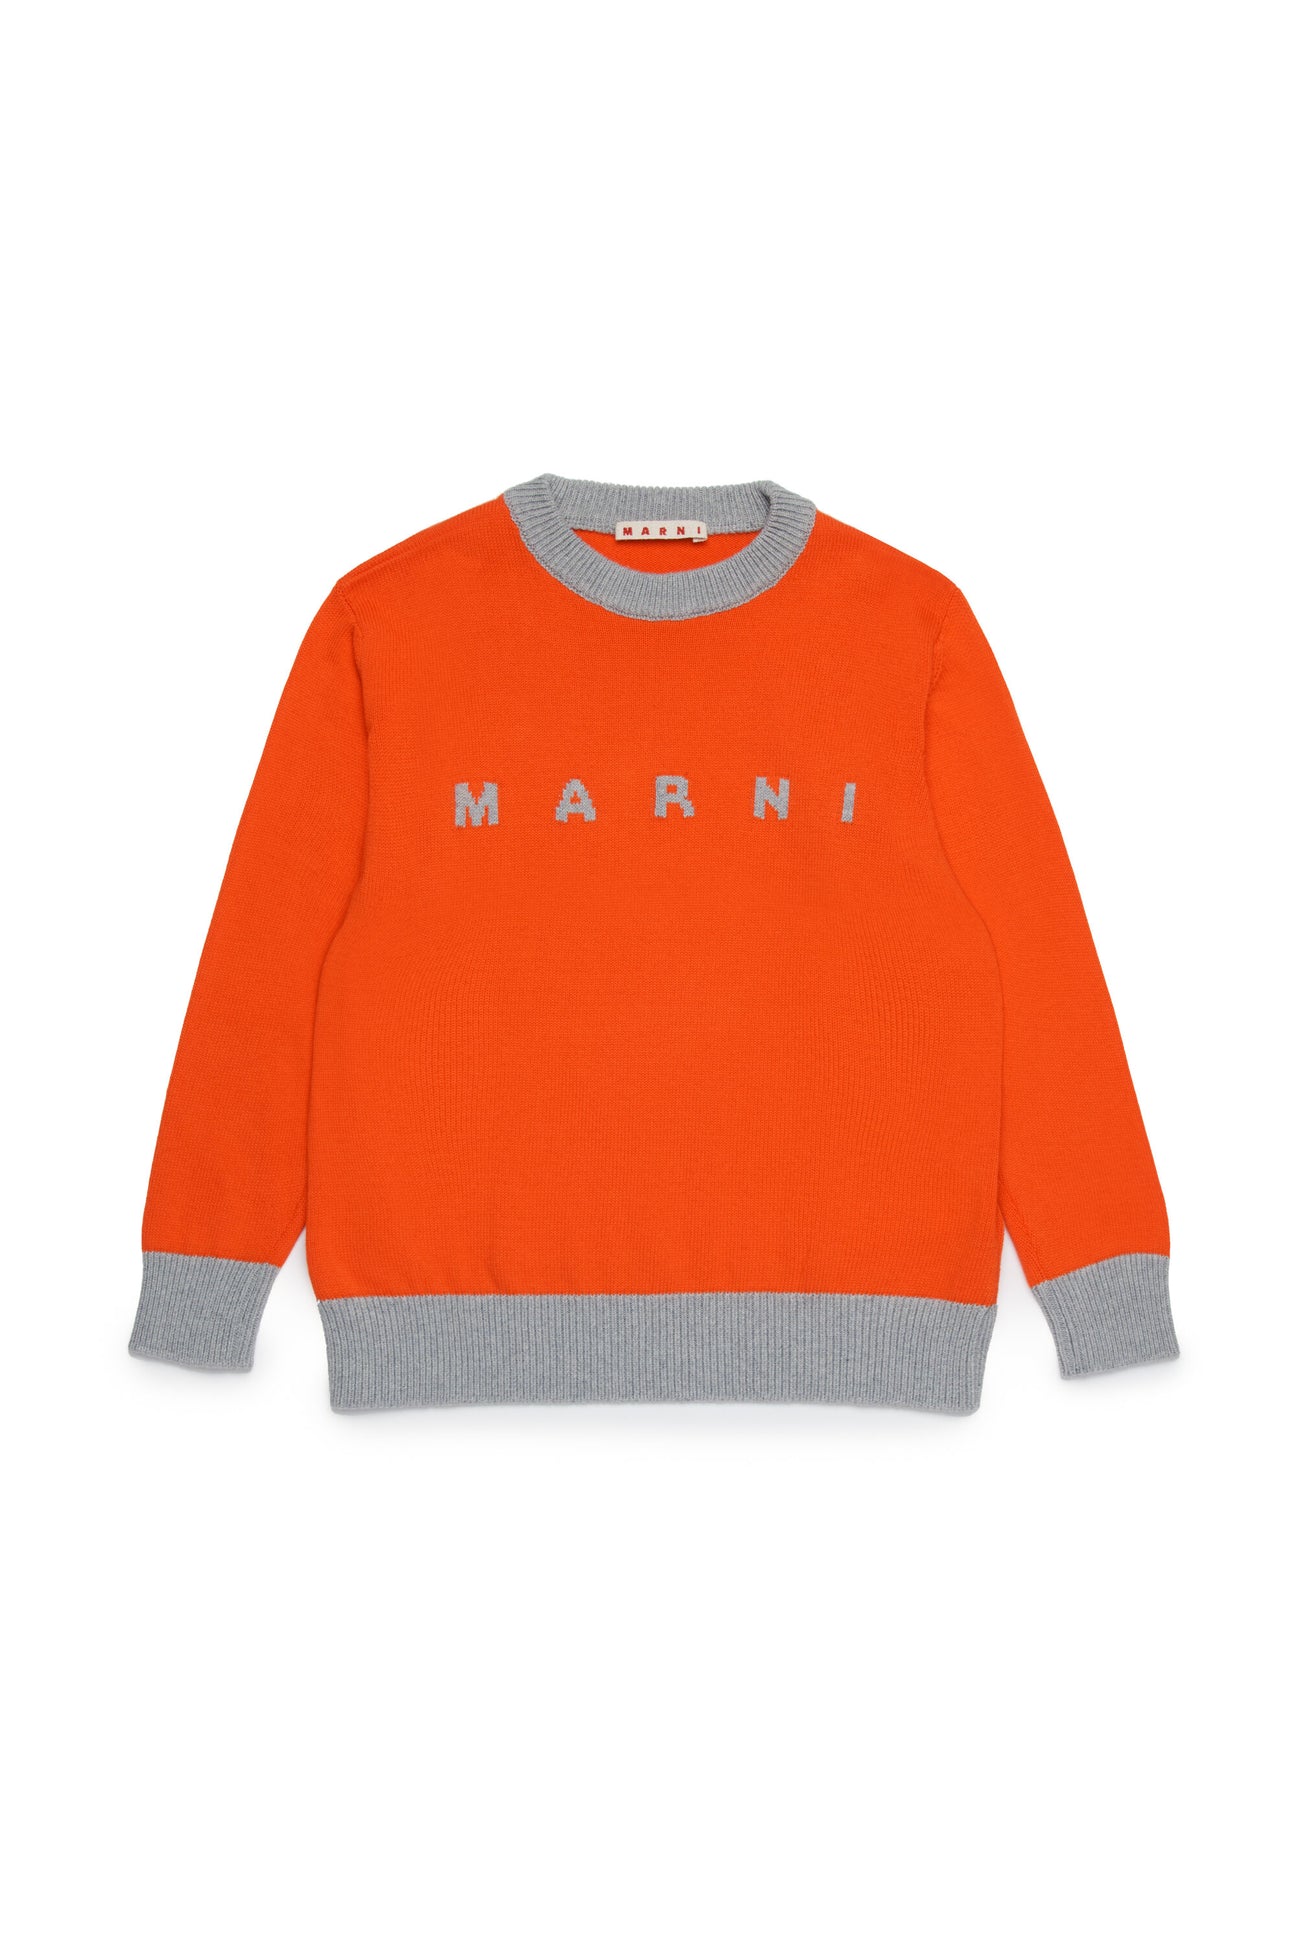 Marni Clothing, Accessories and Shoes for Boys, Girls and Babies